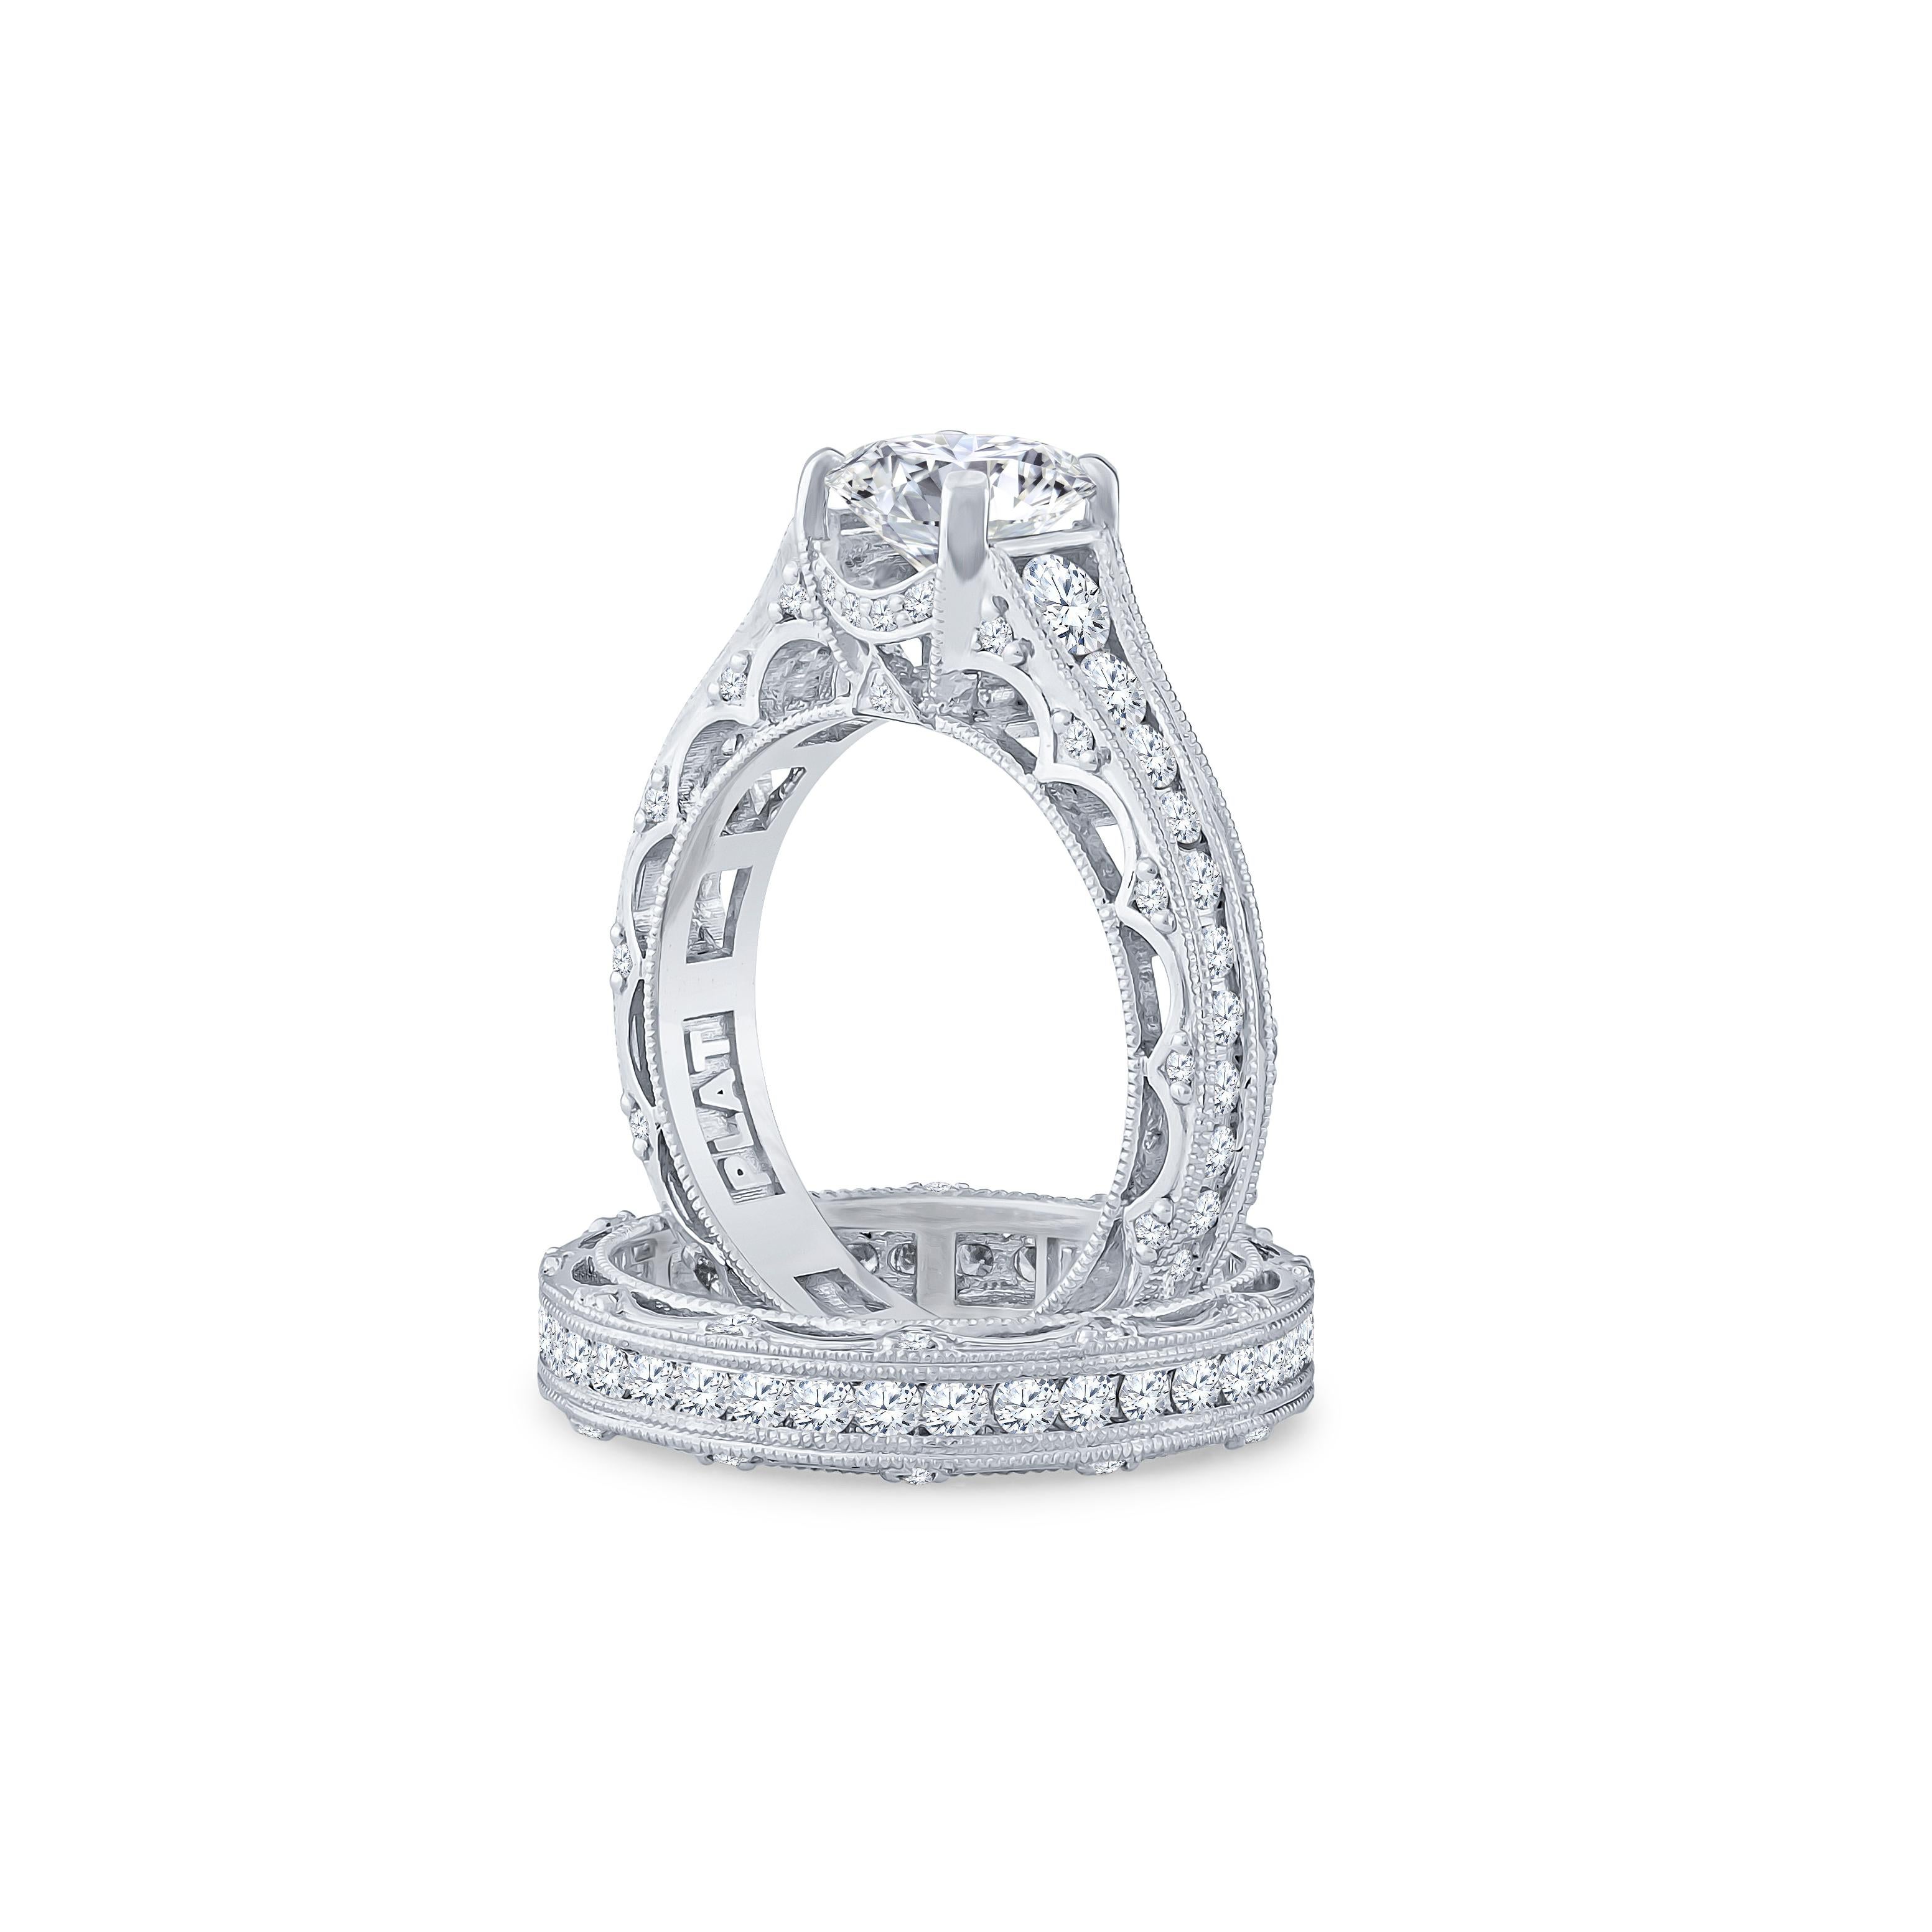 This stunning platinum engagement ring centers a sparkling GIA certified round brilliant cut diamond that weighs 1.53 carat graded J color with VS2 clarity. The center diamond and the wedding band are accentuated by dazzling round cut diamonds that